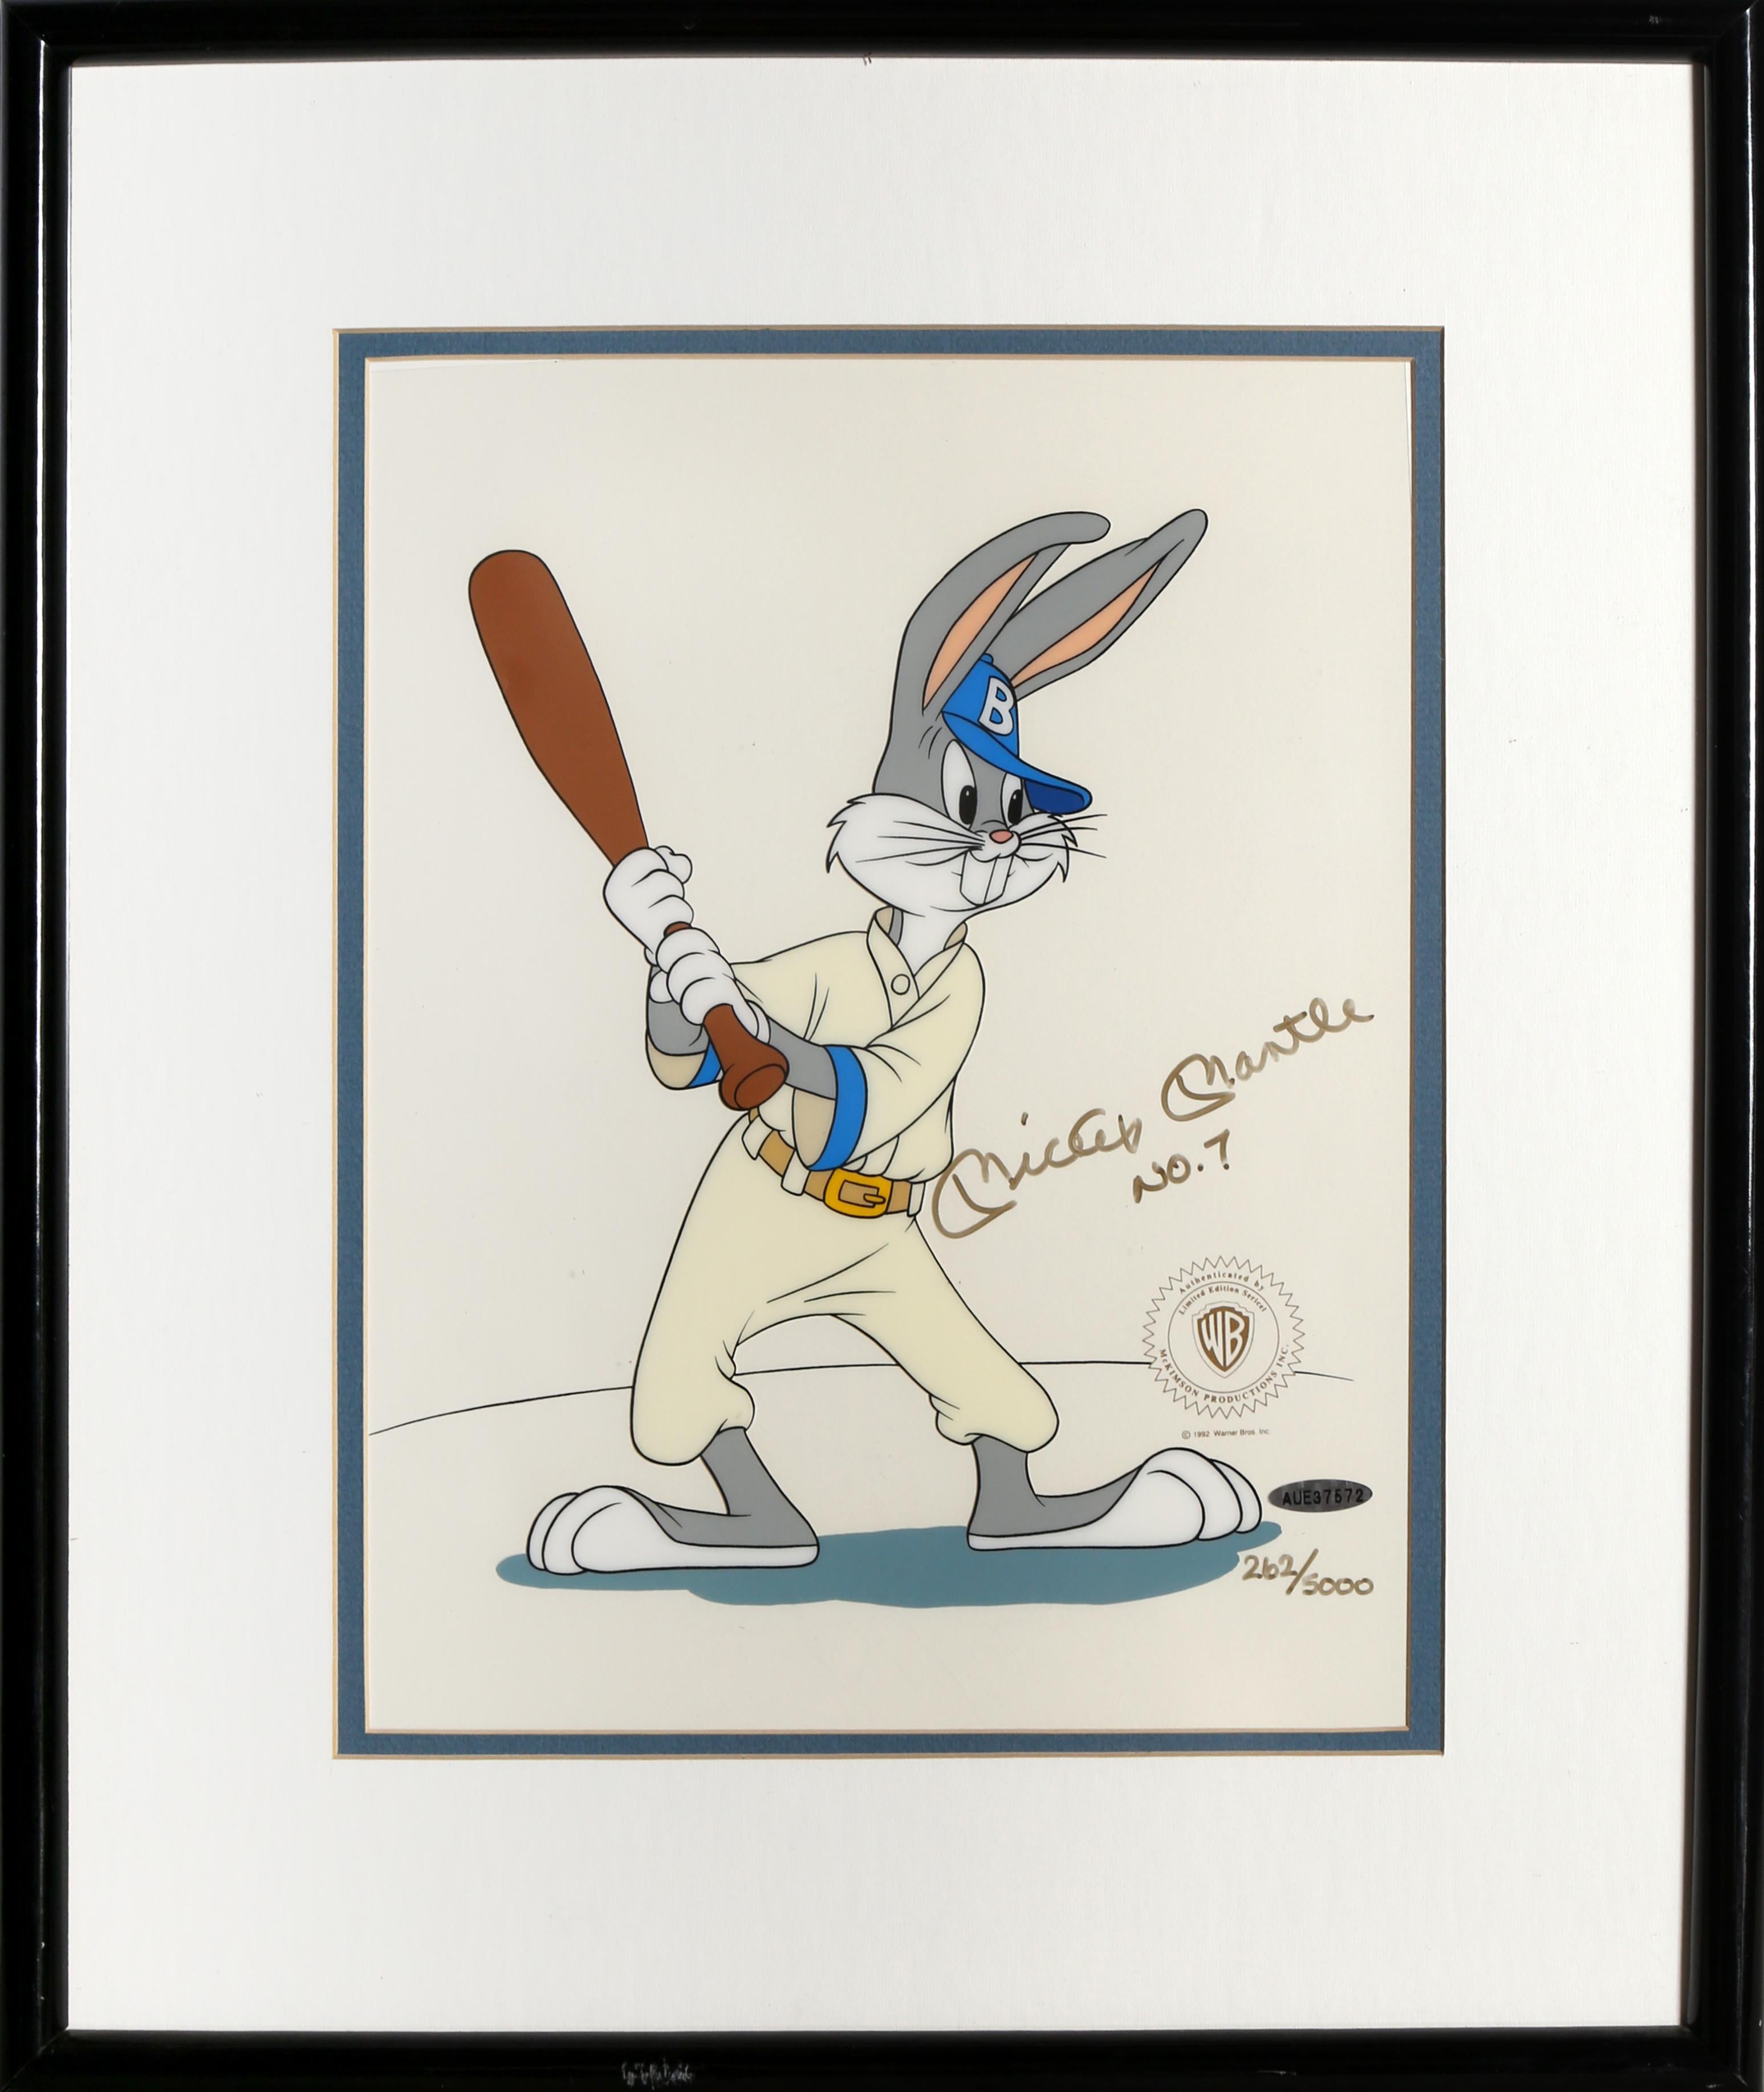 Warner Brothers Studios Figurative Print - Baseball Bugs with Mickey Mantle Autograph